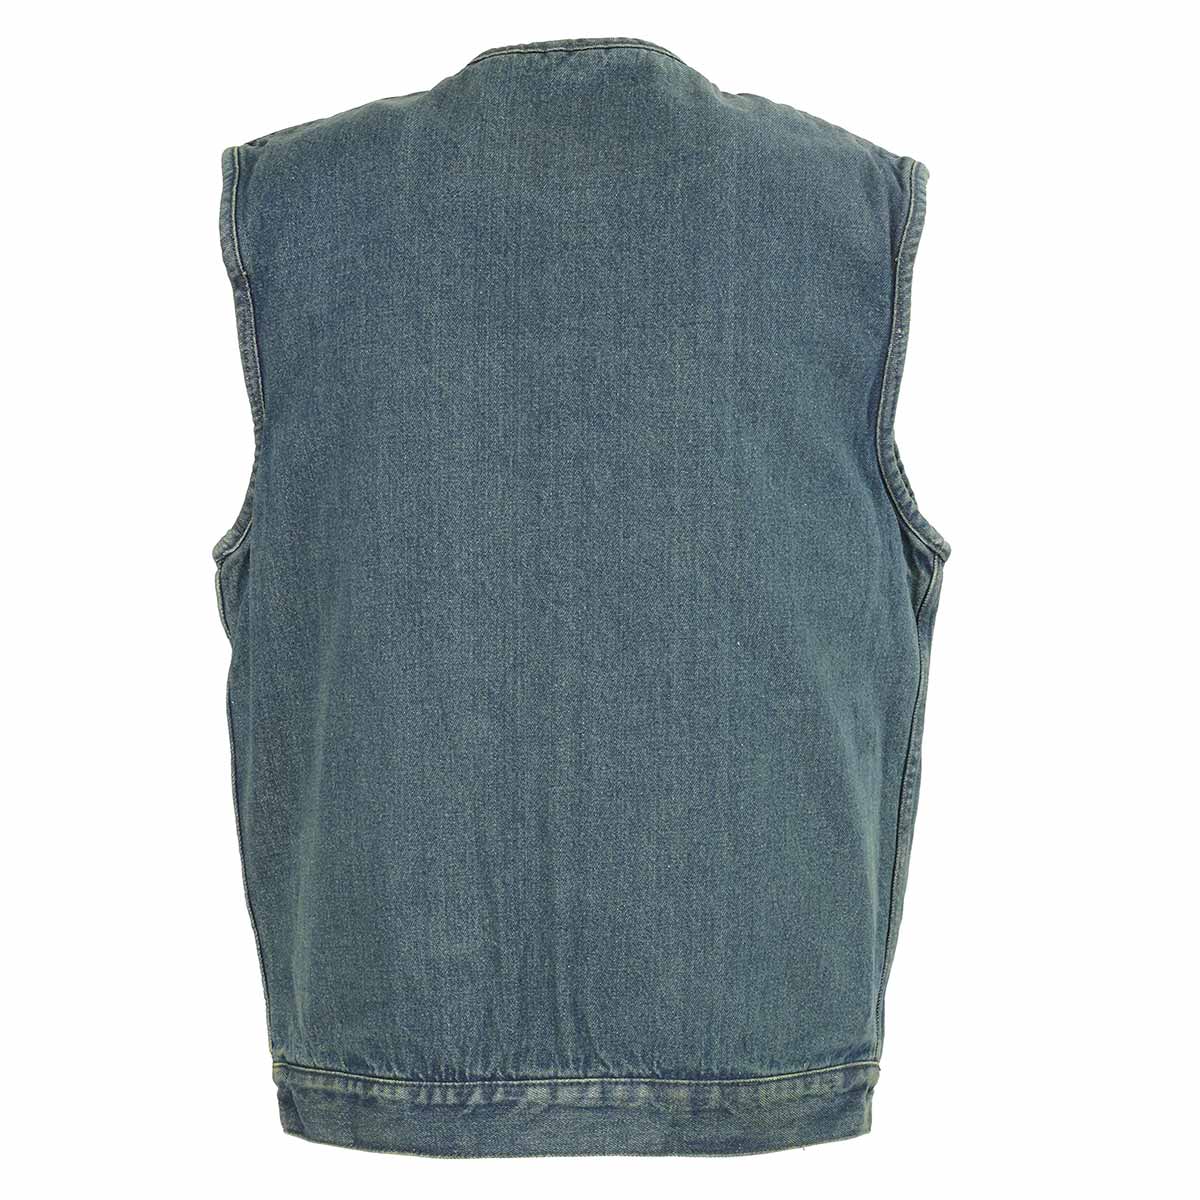 M-Boss Apparel BOS13521 Men's Black Snap Front Denim Club Style Vest with Conceal and Carry Pocket